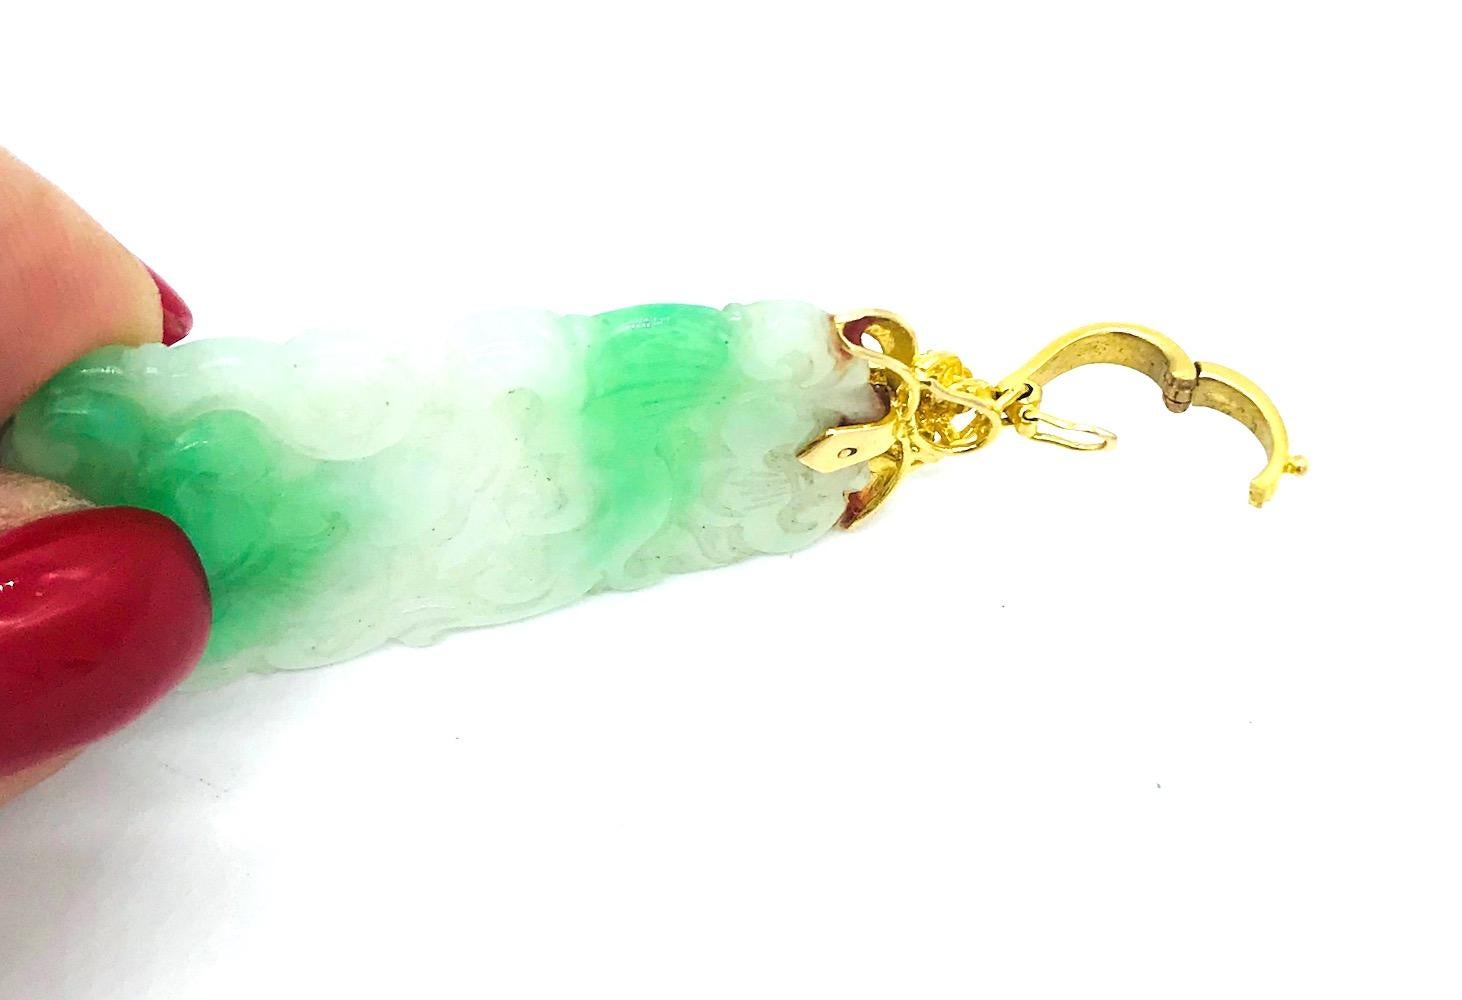 Chinese, Green Jade Carved Floral Pendant, Diamond
Enhancer open style pendant with 5-round diamonds. Pendant measures 2.5 inches tall complete and 1 inch wide. Quality pendant weight is 13.3 grams. 14 karat yellow gold. Diamonds are VS H color,